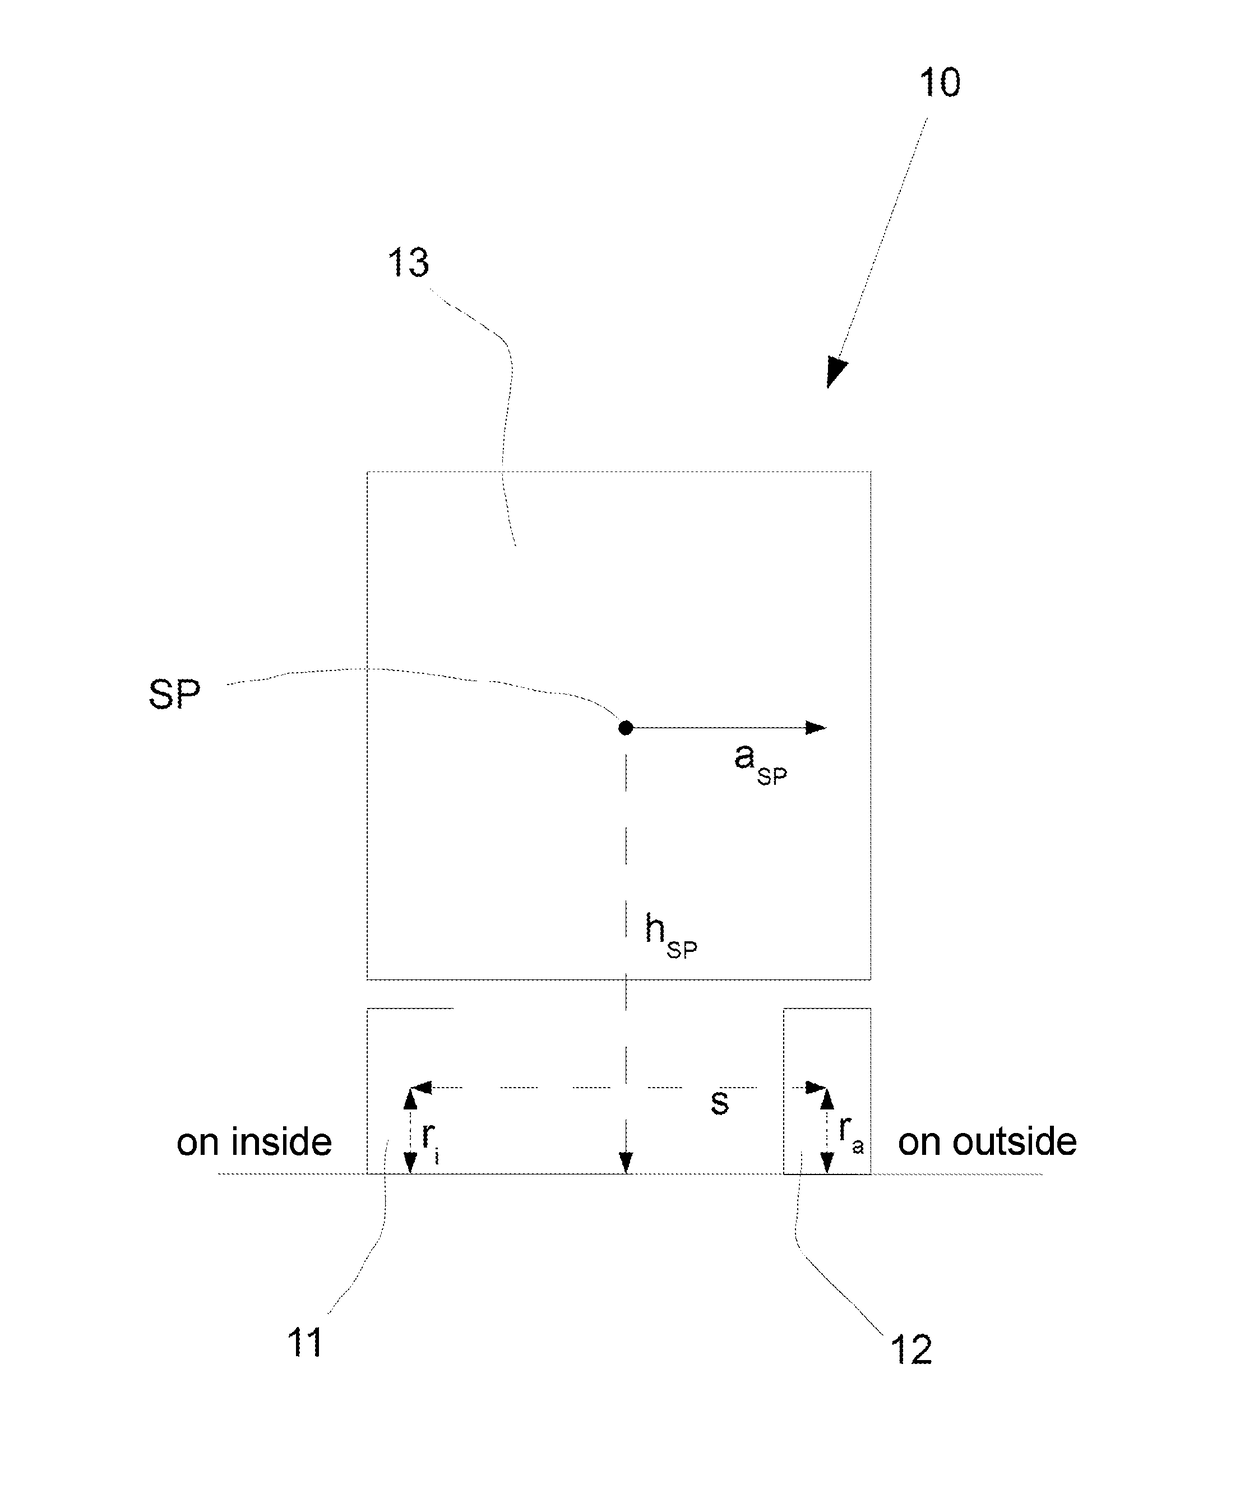 Method for operating an electronic brake system